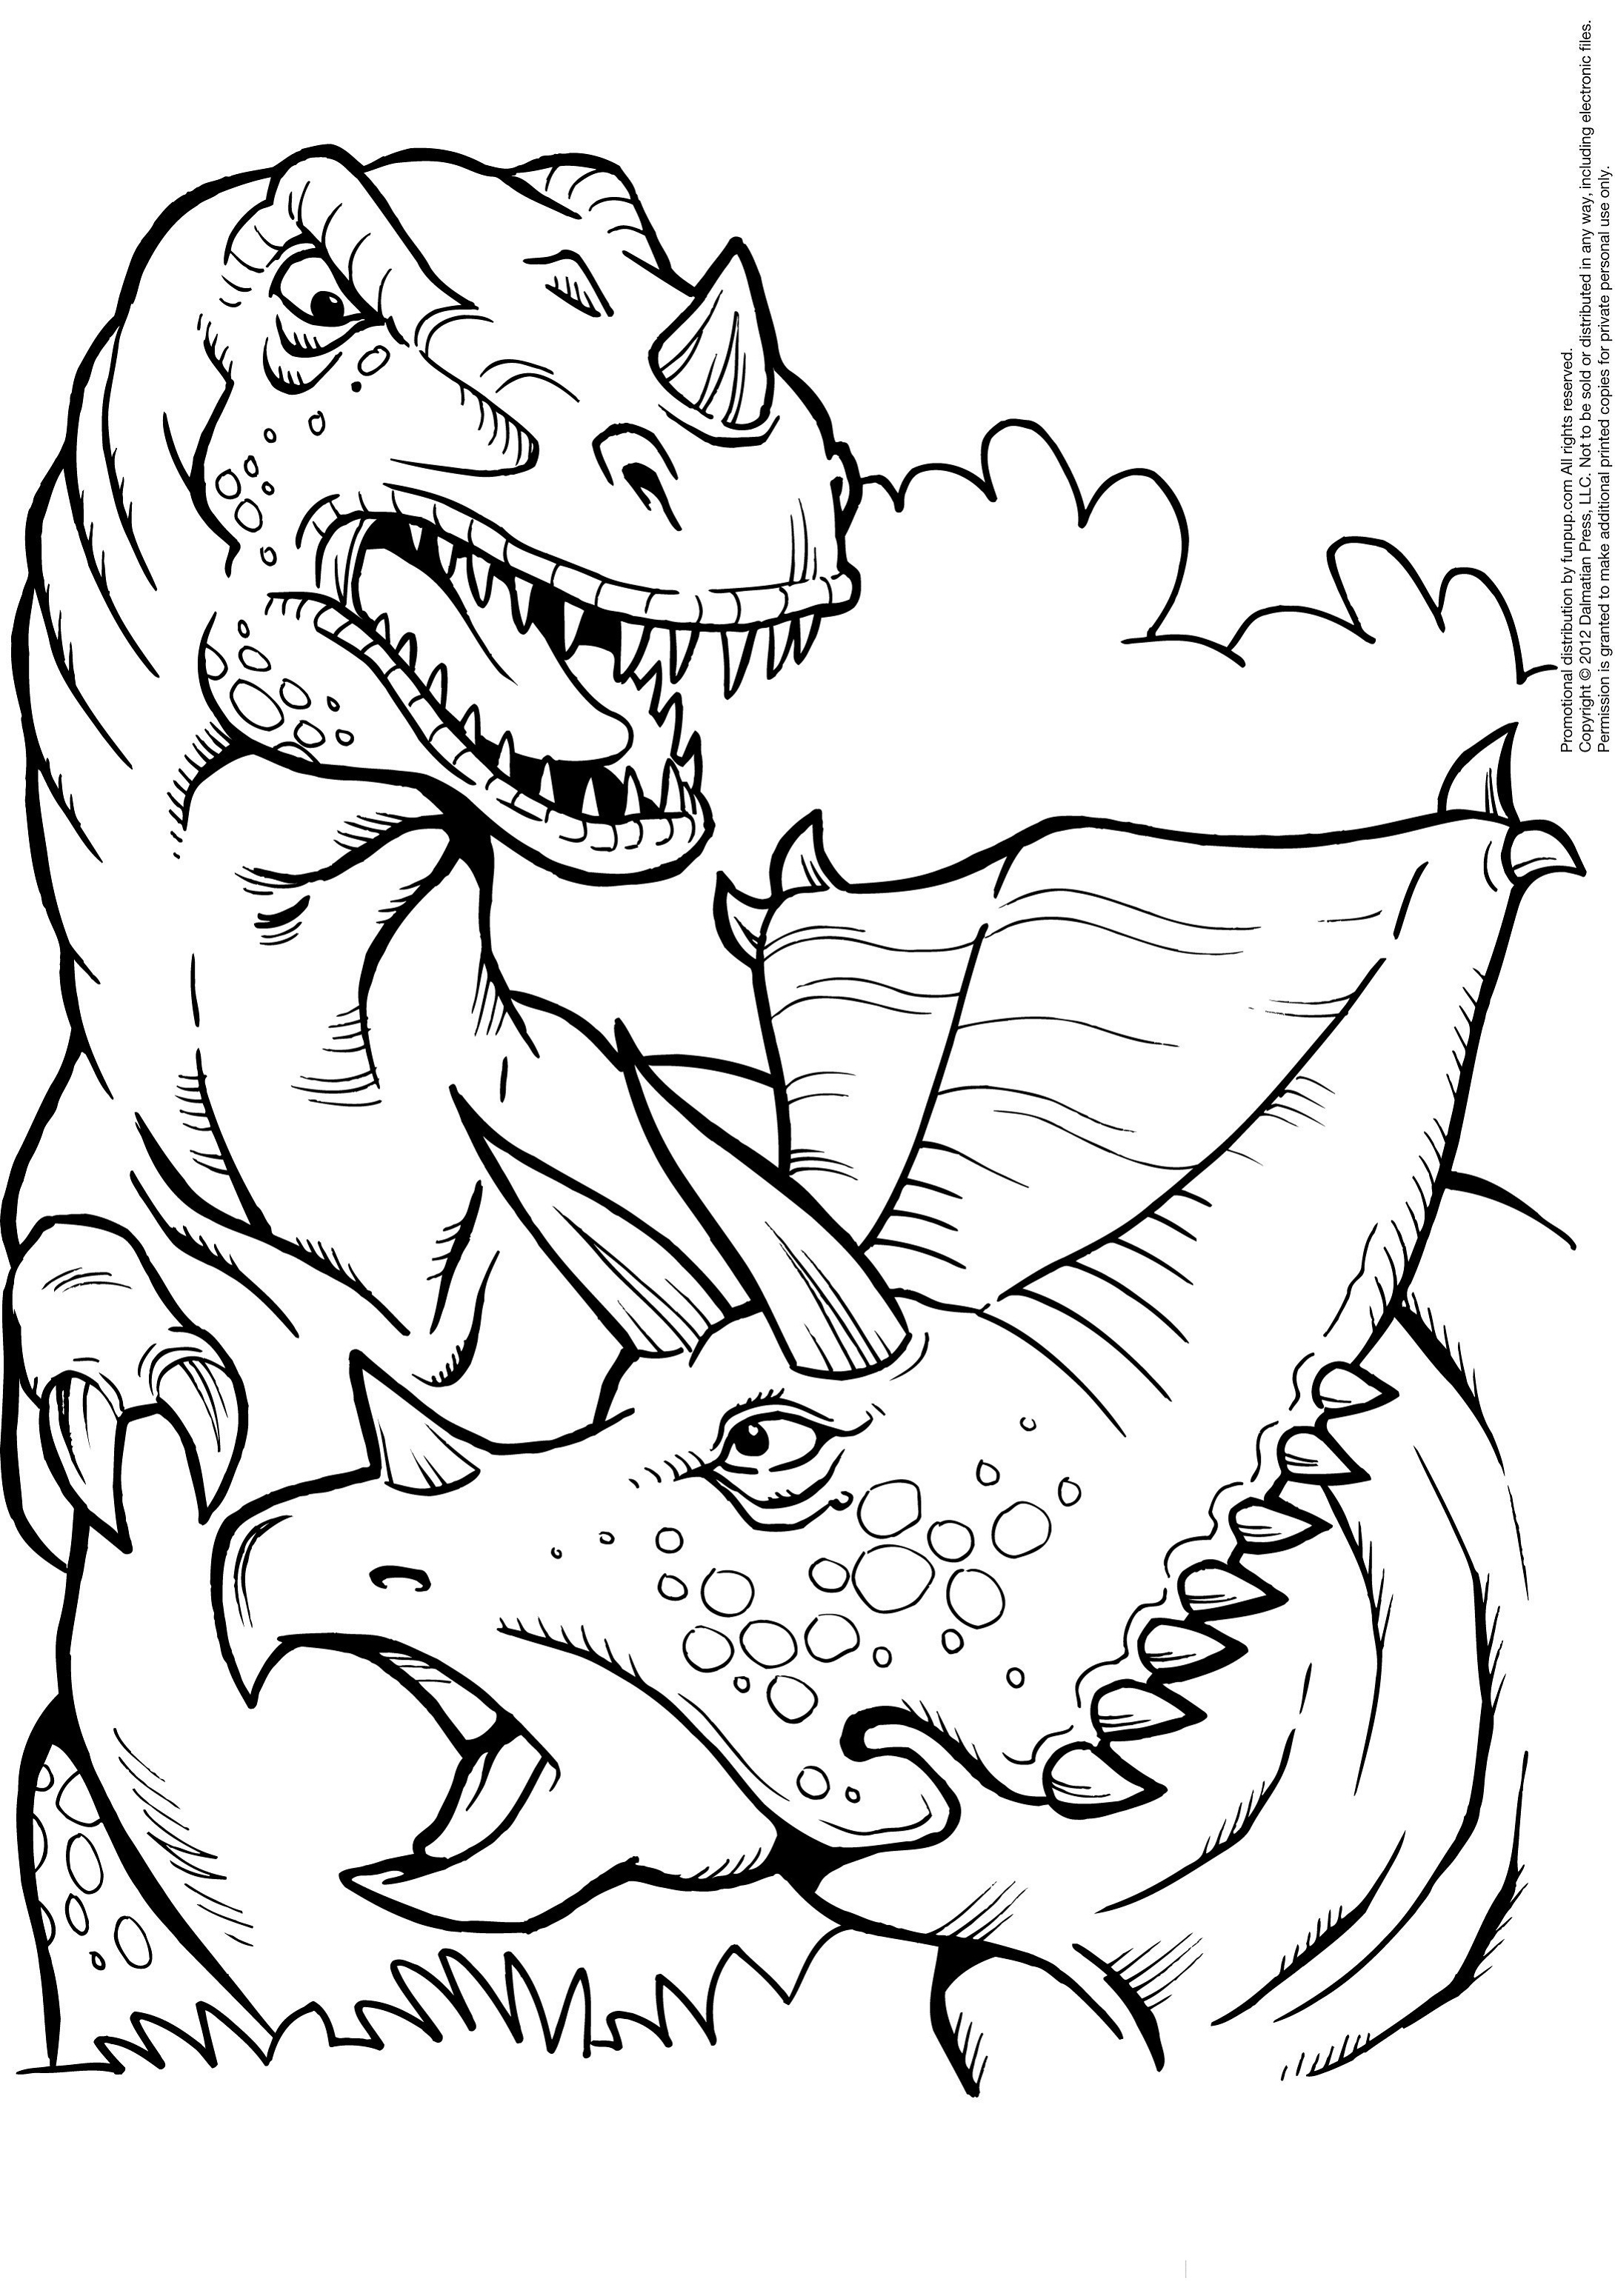 indominus rex coloring page free